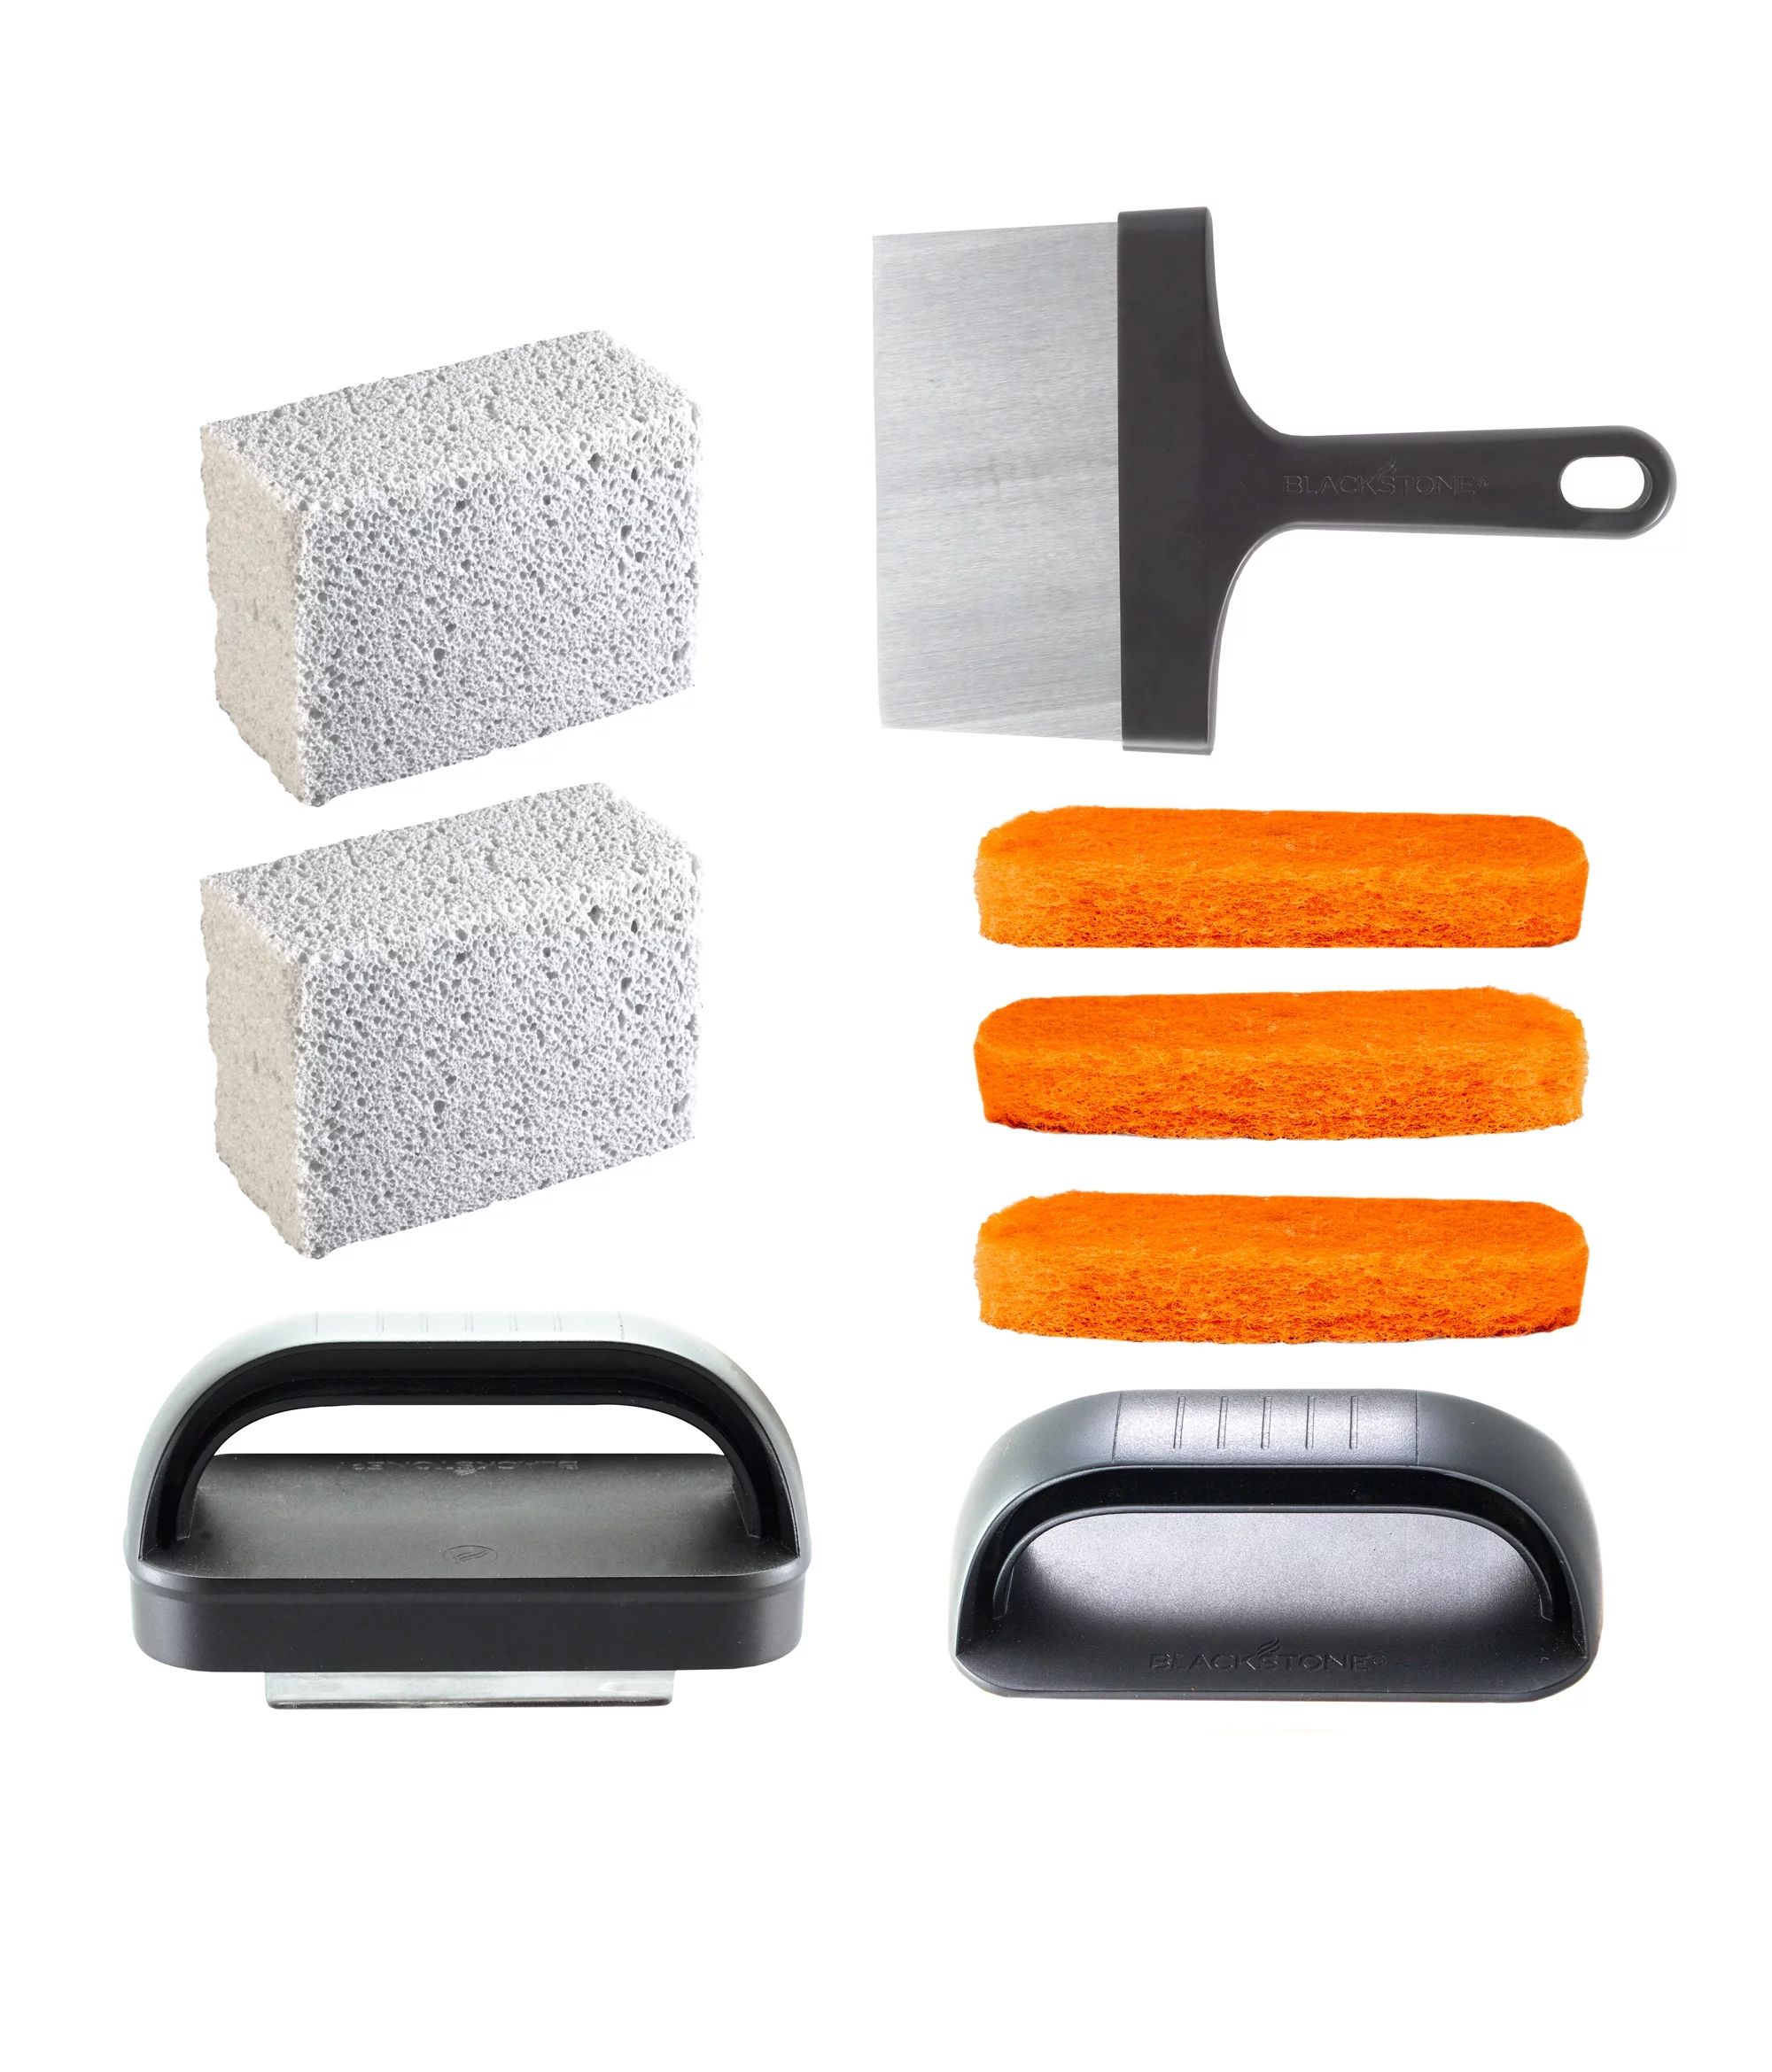 Blackstone 8 Piece Griddle Cleaning Kit Works on Hot or Cold Surfaces | Walmart (US)